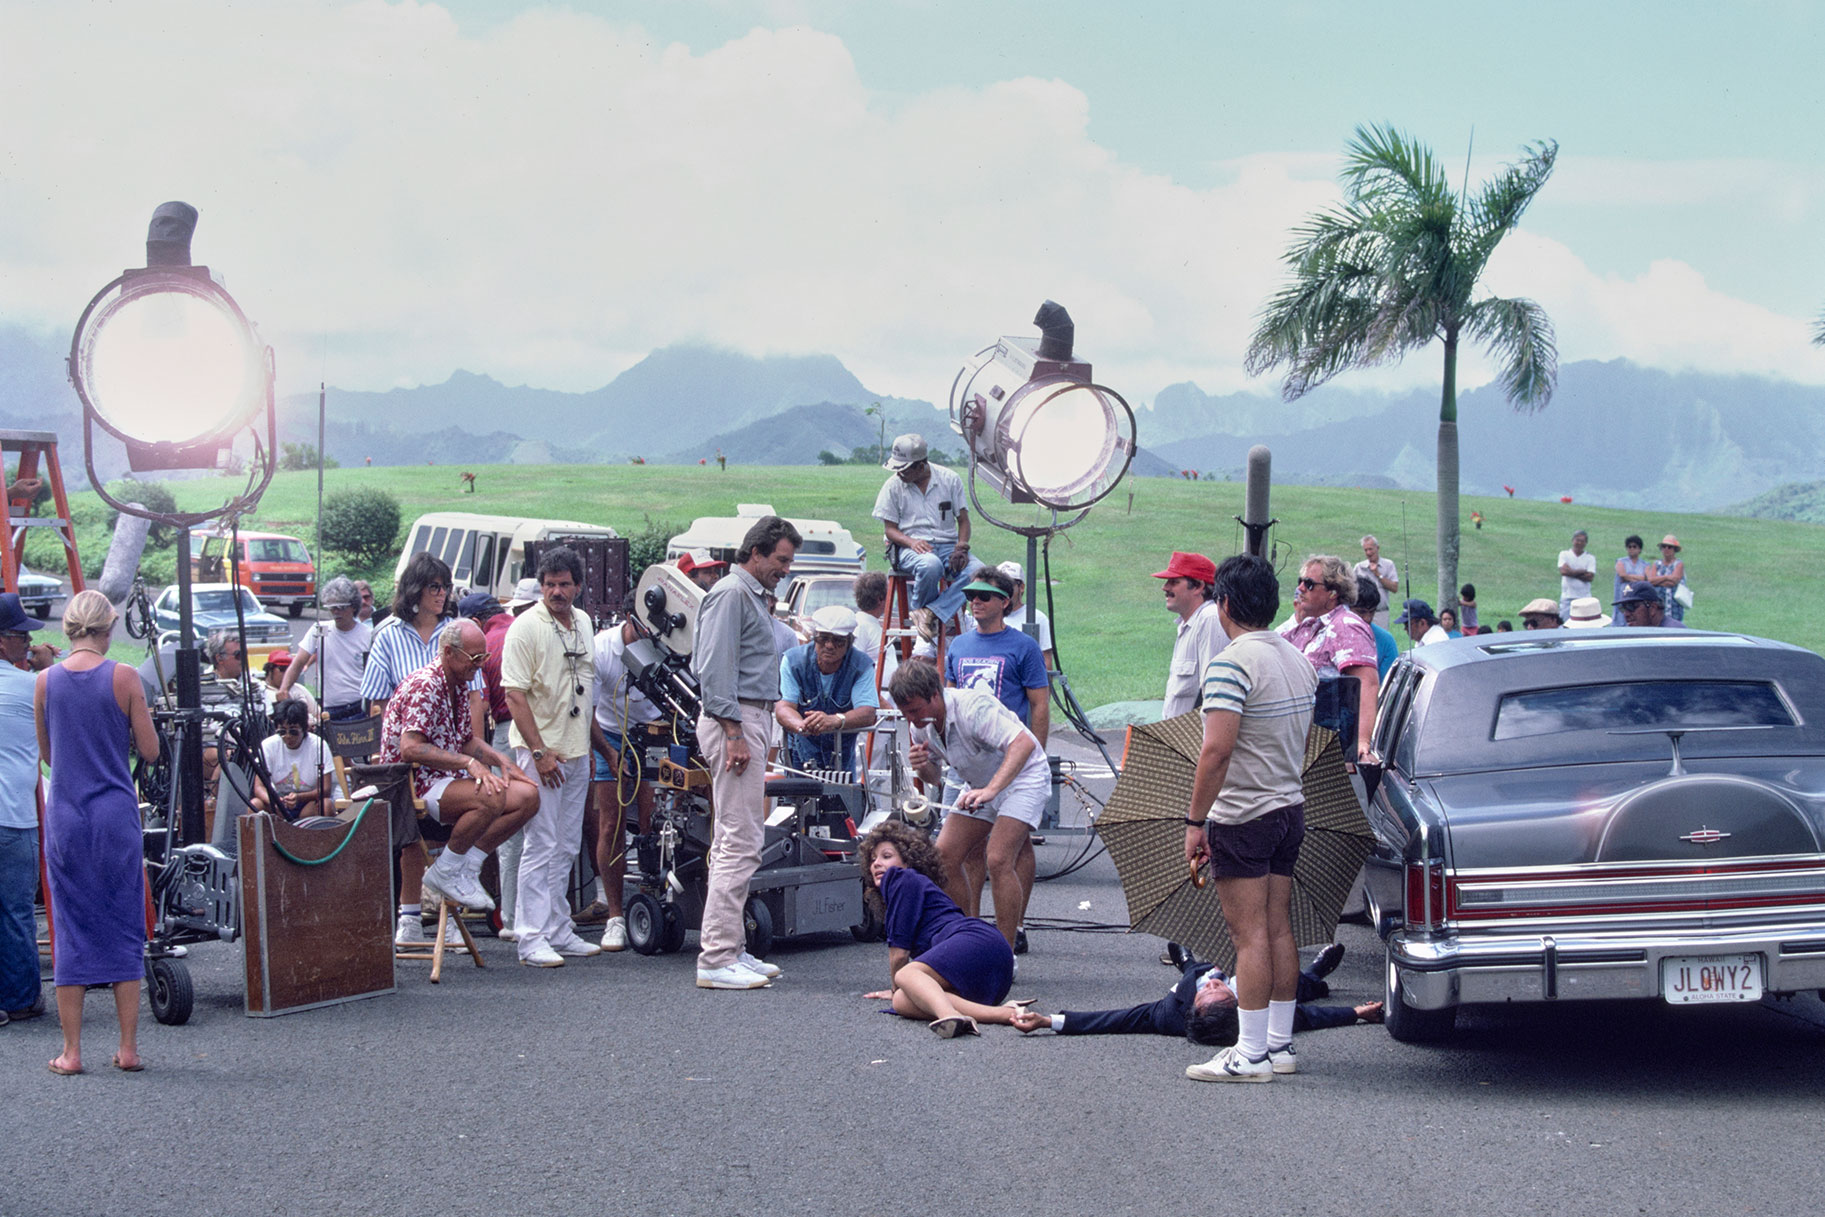 Tom Selleck (as Magnum) (in center wearing white pants) with Marta DuBois (as Michelle Hue) (in blue dress on the ground), in a production shot of the MAGNUM PI episode, "Little Girl Who."